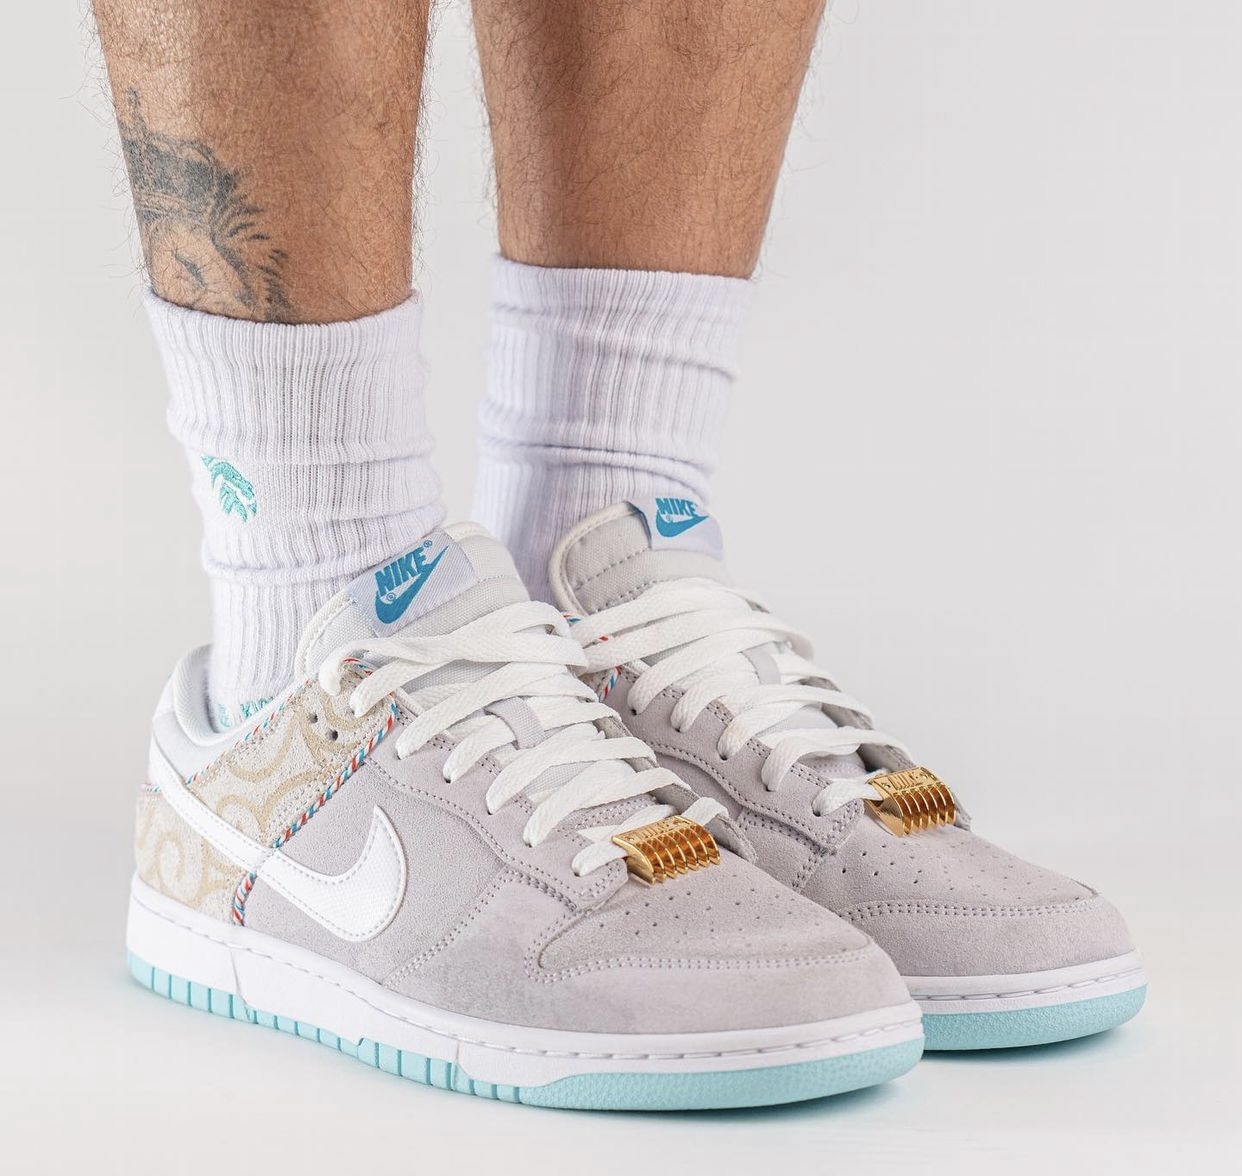 Nike Dunk Low Barber Shop White DH7614-500 On-Feet